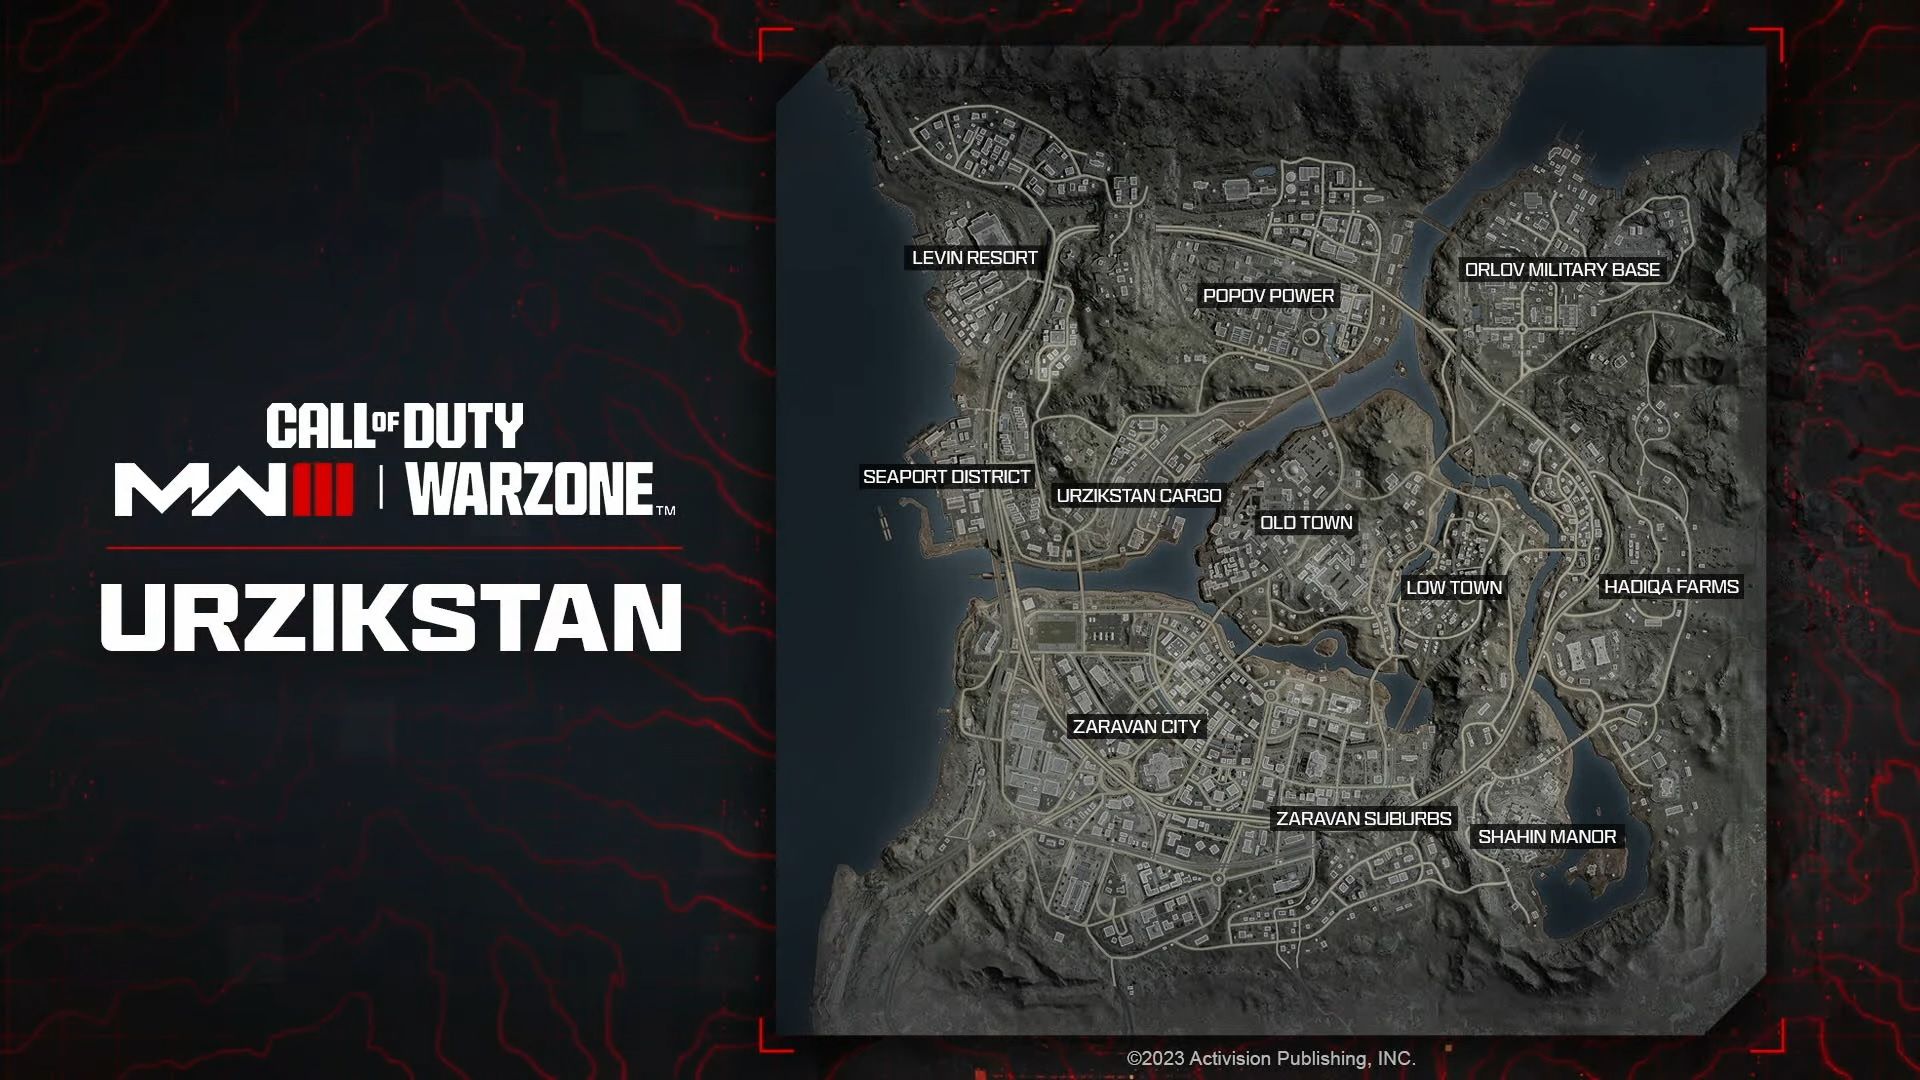 call of duty warzone urzikstan map